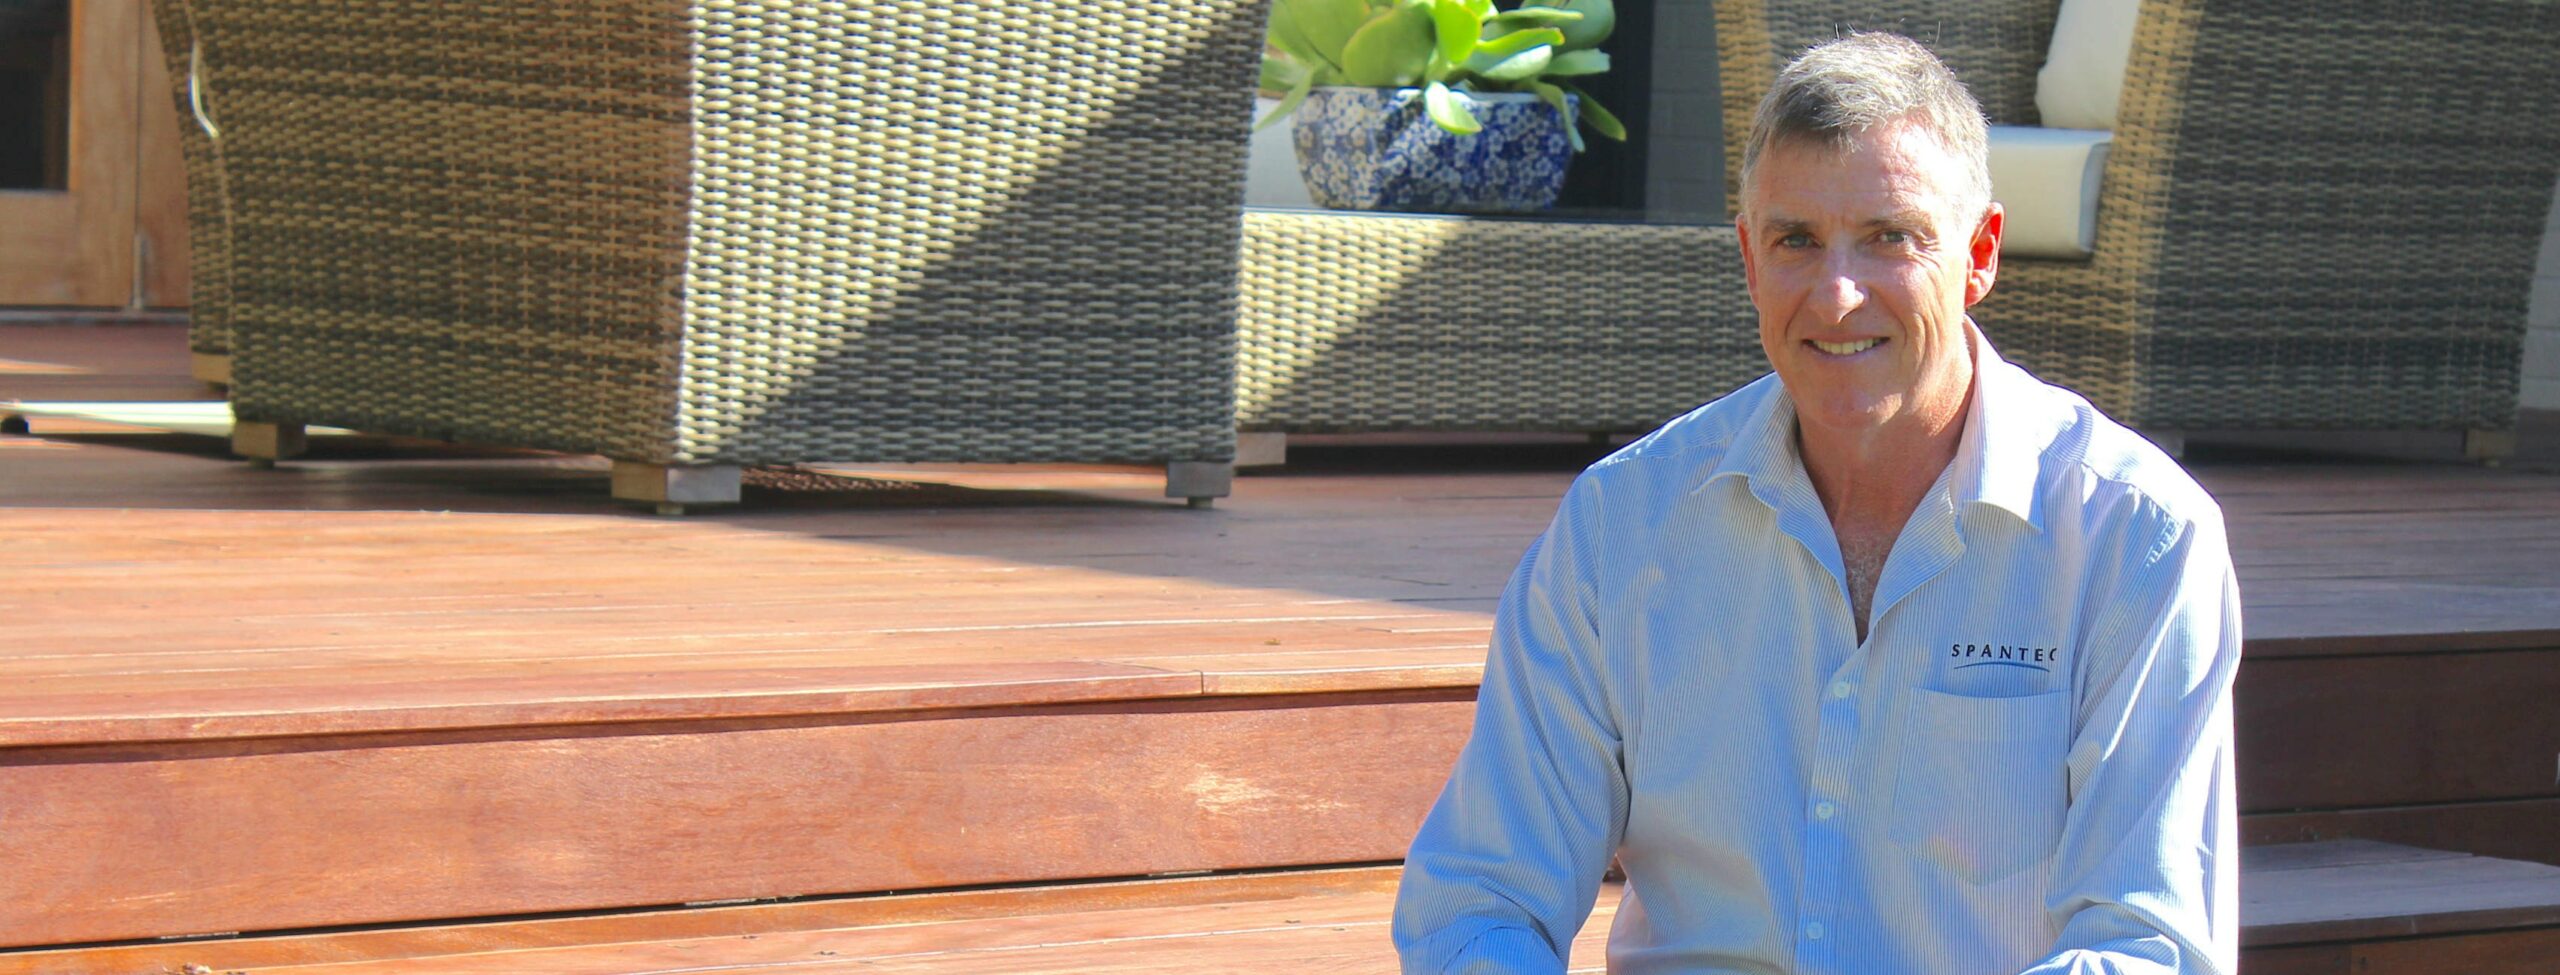 Spantec Director, Roy Beaumont smiling, witting on a deck constructed using Spantec deckframe.